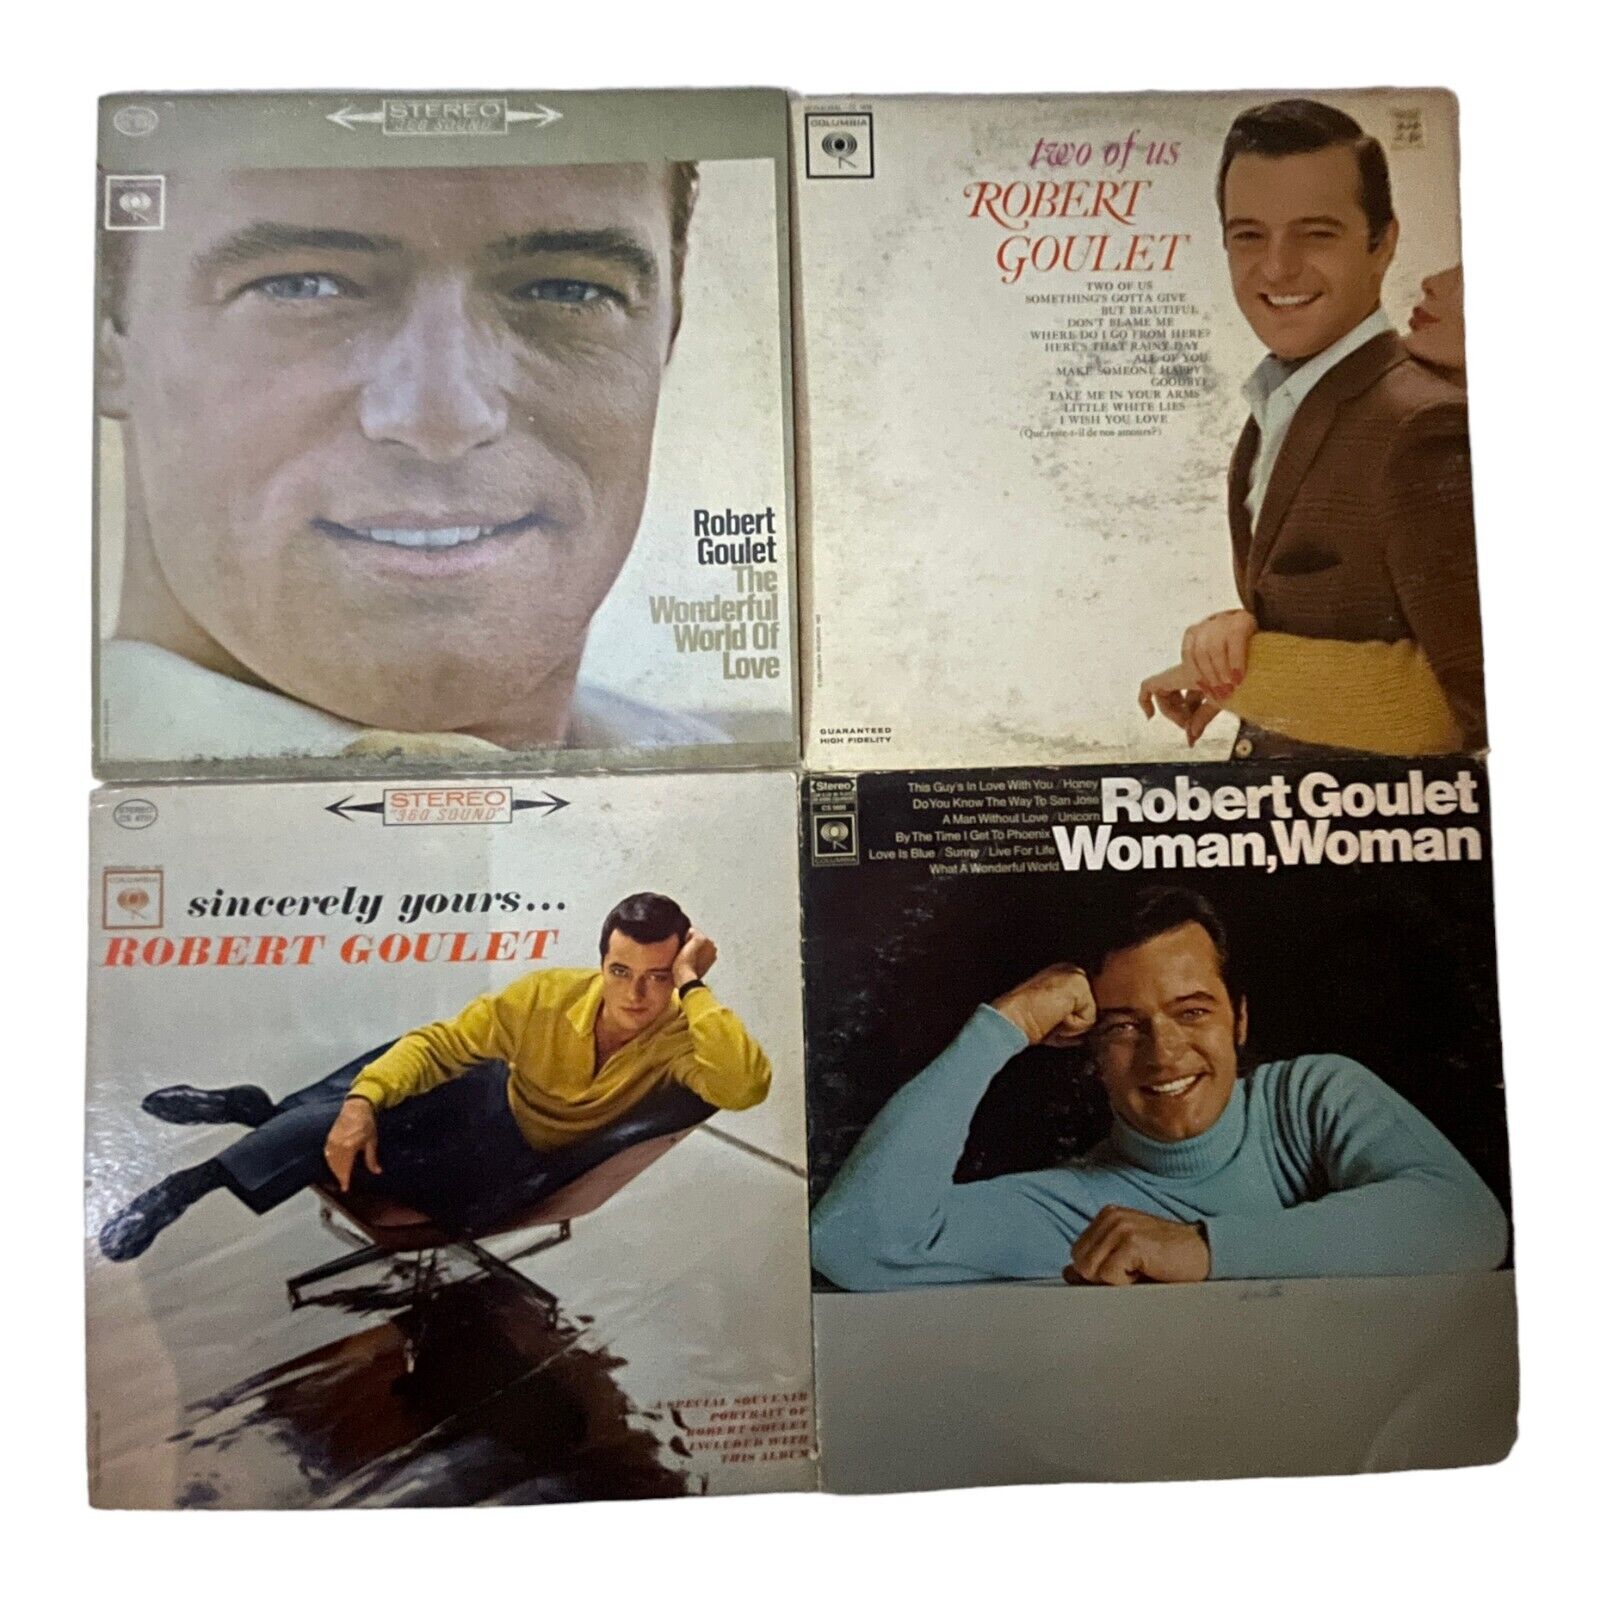 Lot of 4 Robert Goulet Vinyl, LP   The Wonderful World Of Love Two Of Us